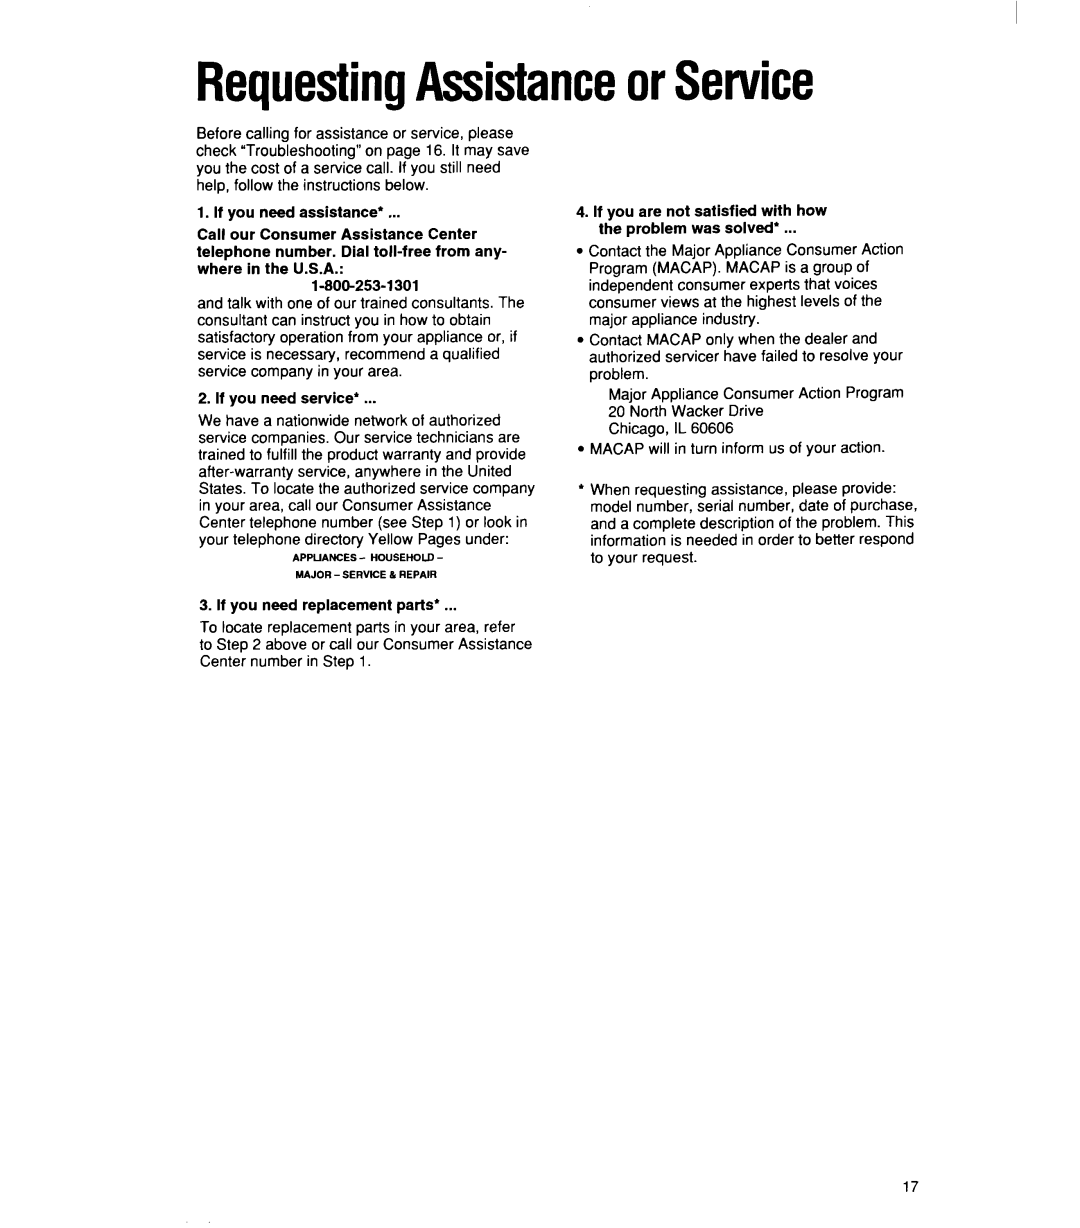 Whirlpool ACU072XE installation instructions RequestingAssistanceorService 